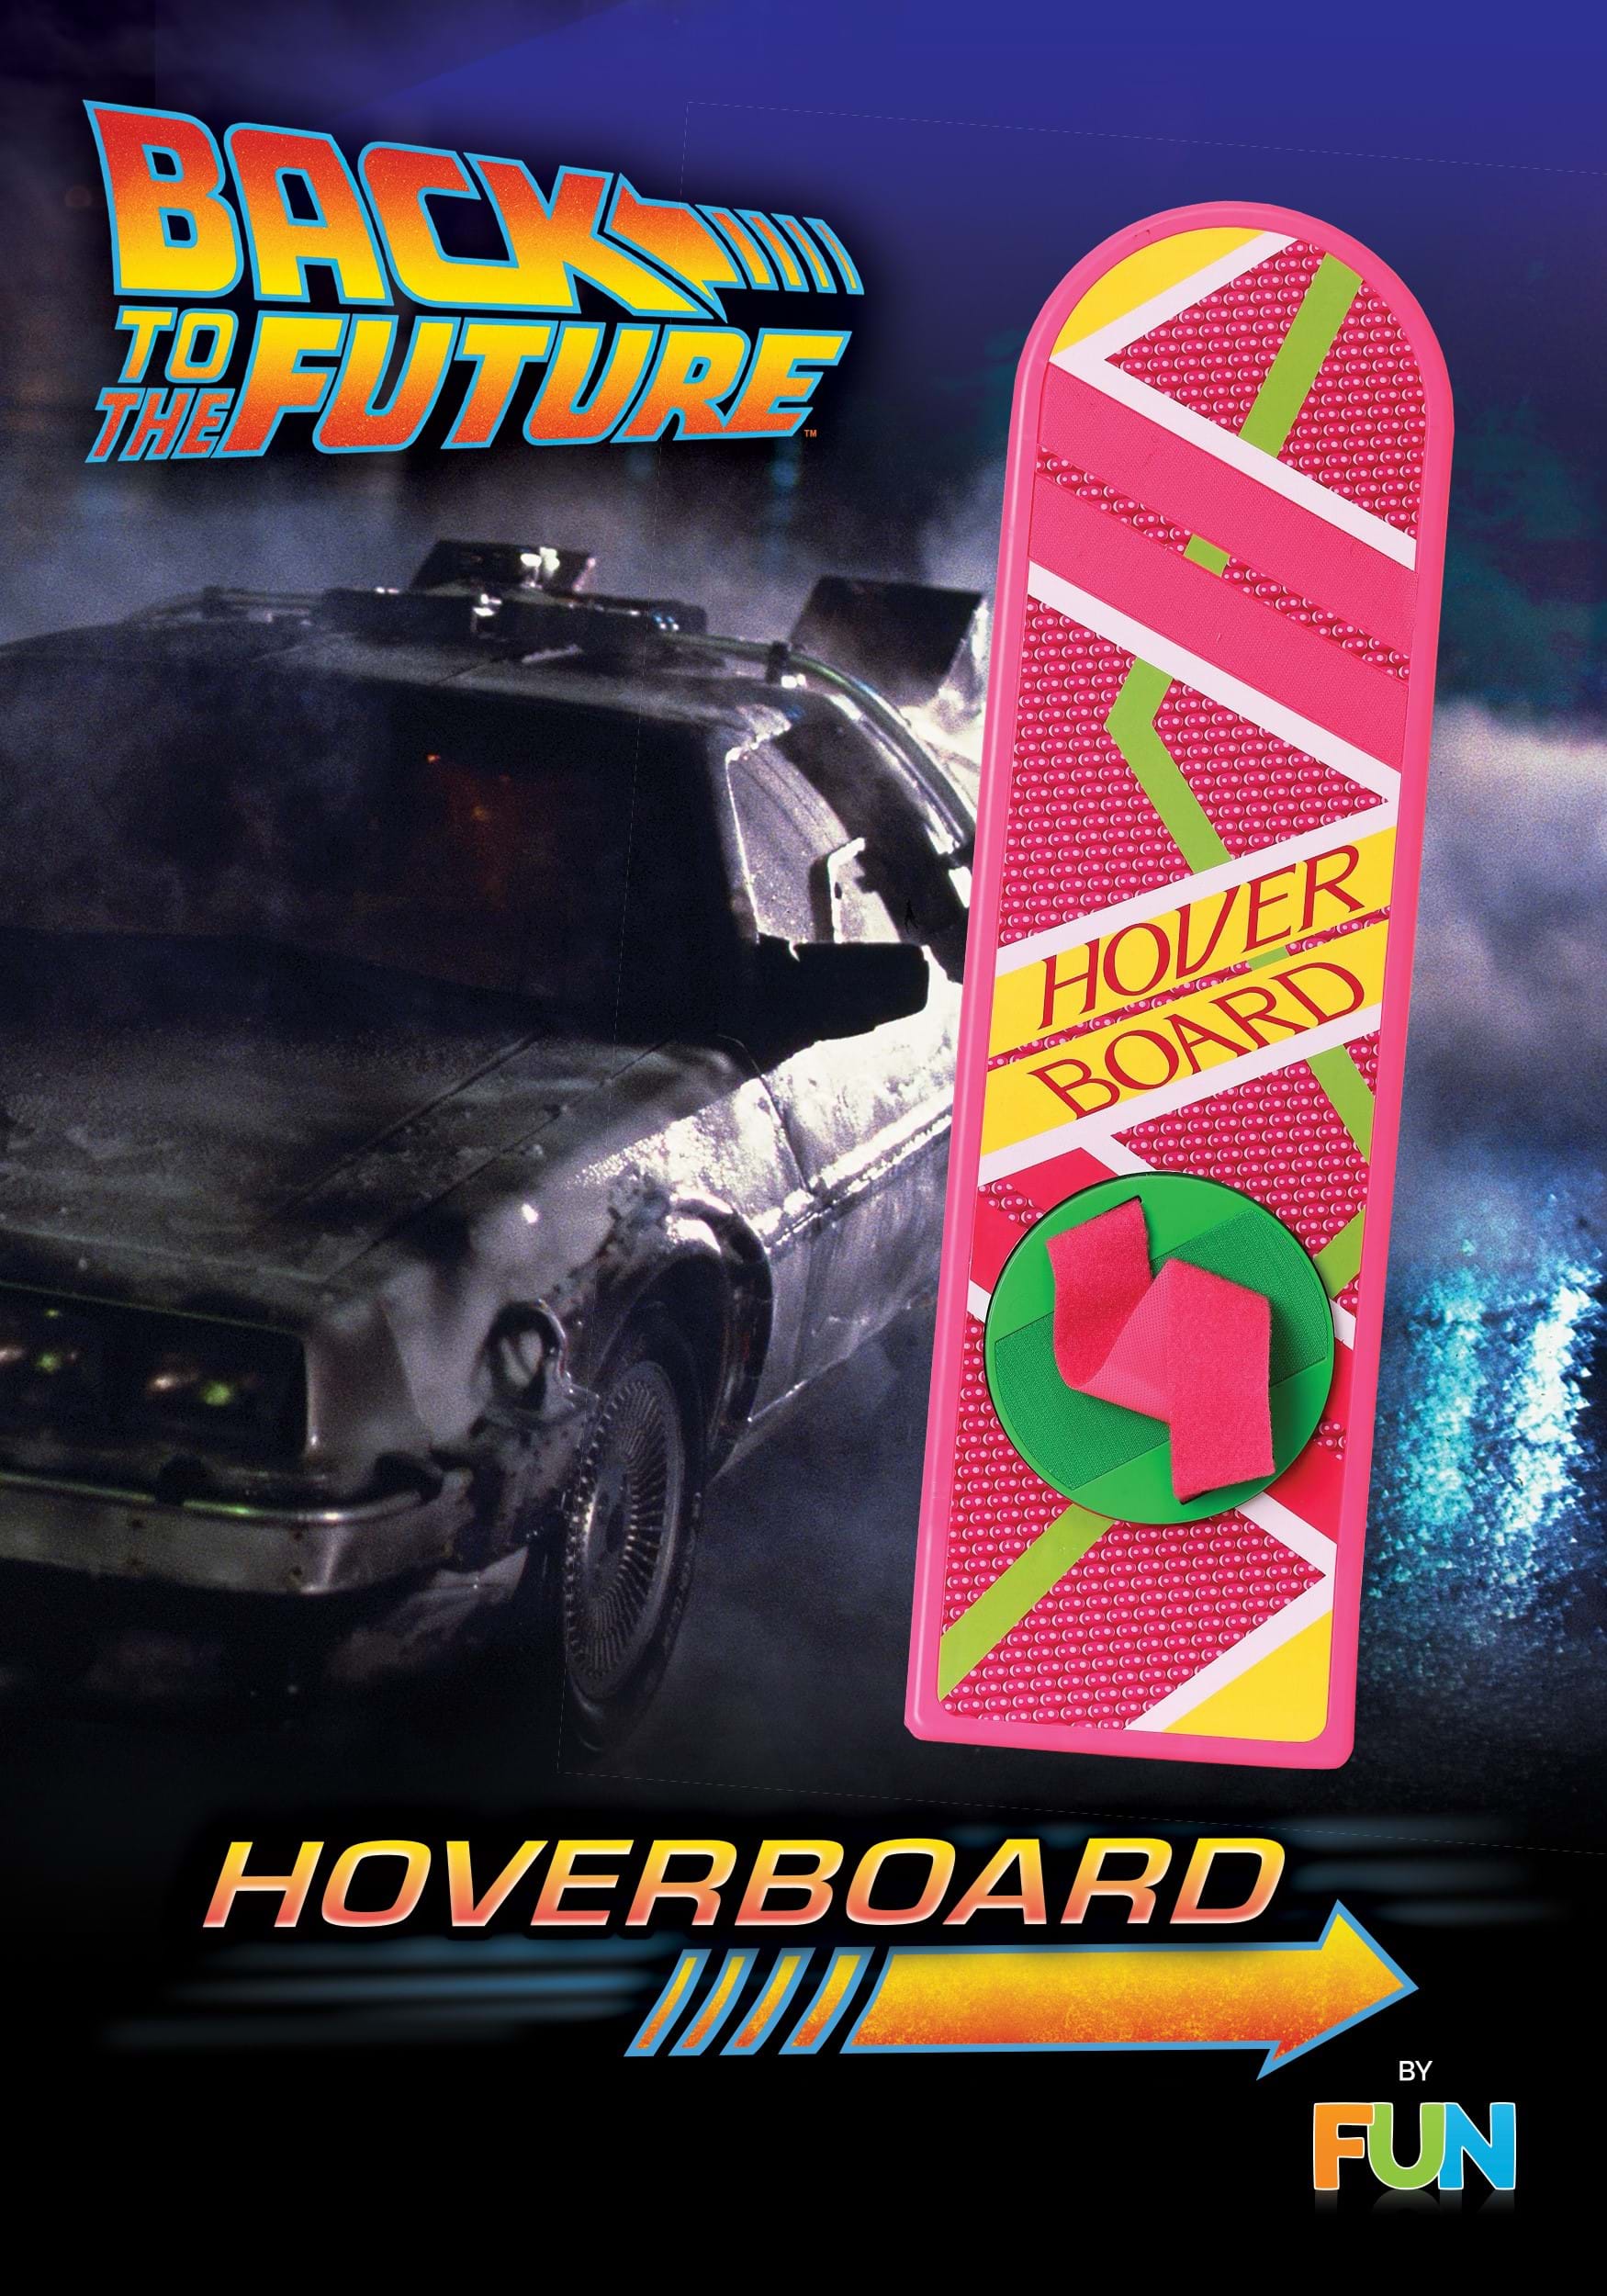 Build: Back to the future Pitbull Hoverboard - U me and the kids